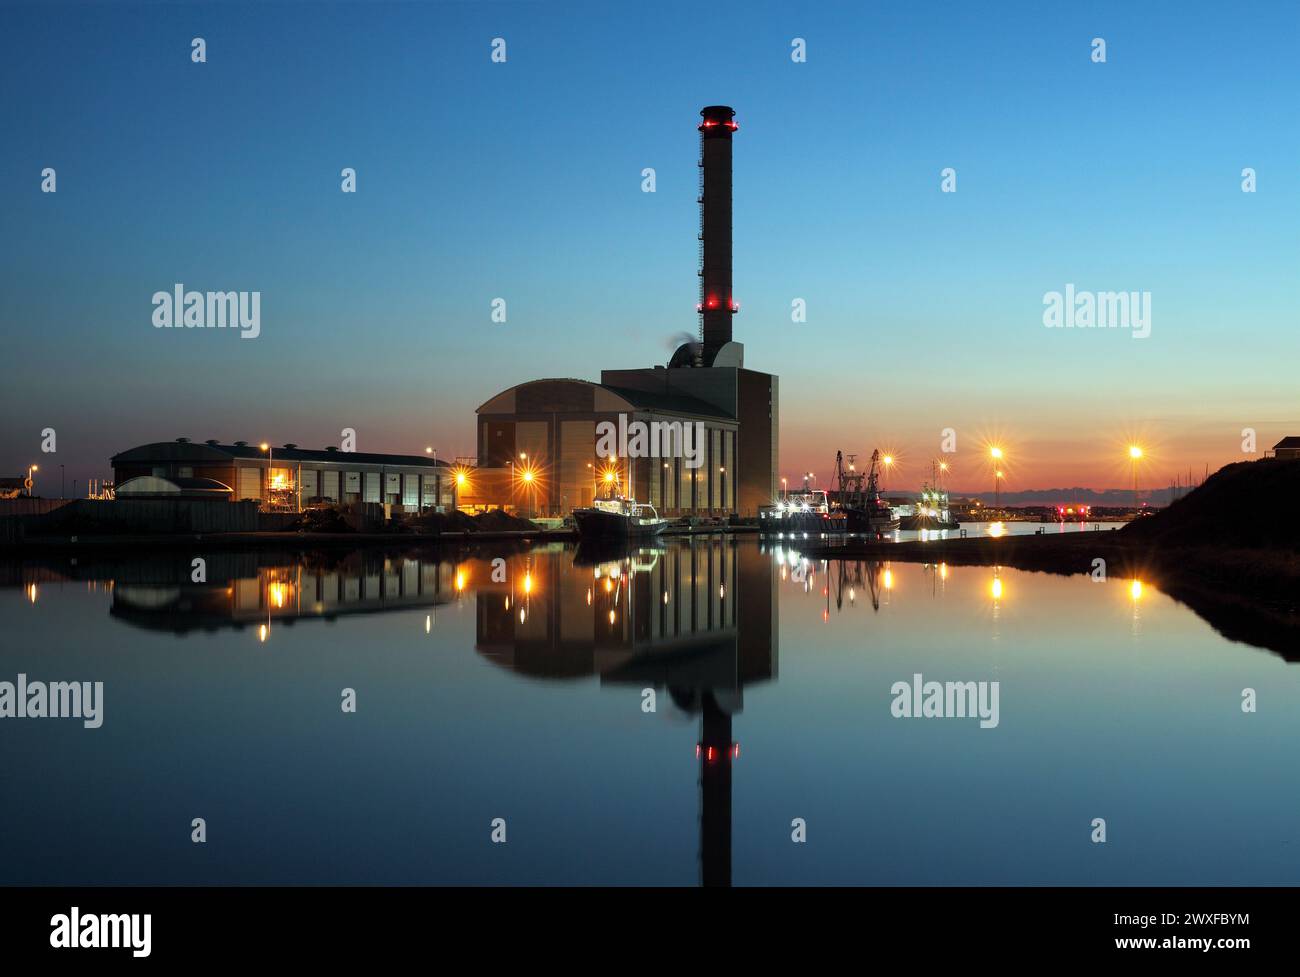 A twilight view of Shoreham gas-fired power station and its reflection in   the still waters of Shoreham Harbour. Stock Photo